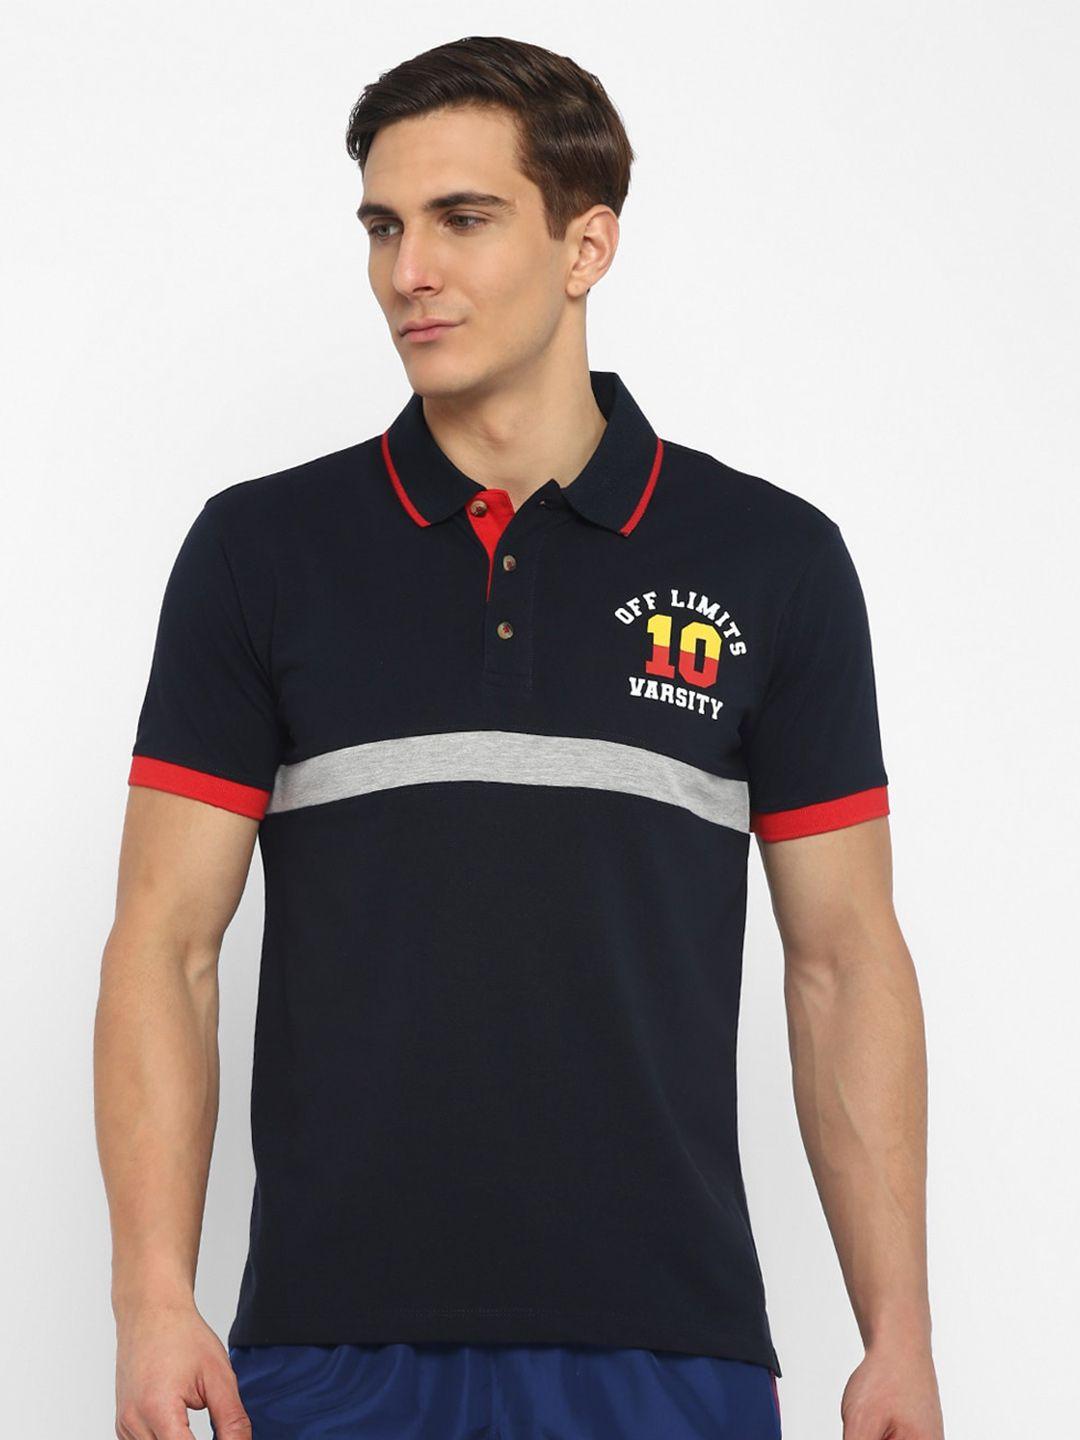 off limits striped polo collar rapid-dry & anti microbial cotton sports t-shirt